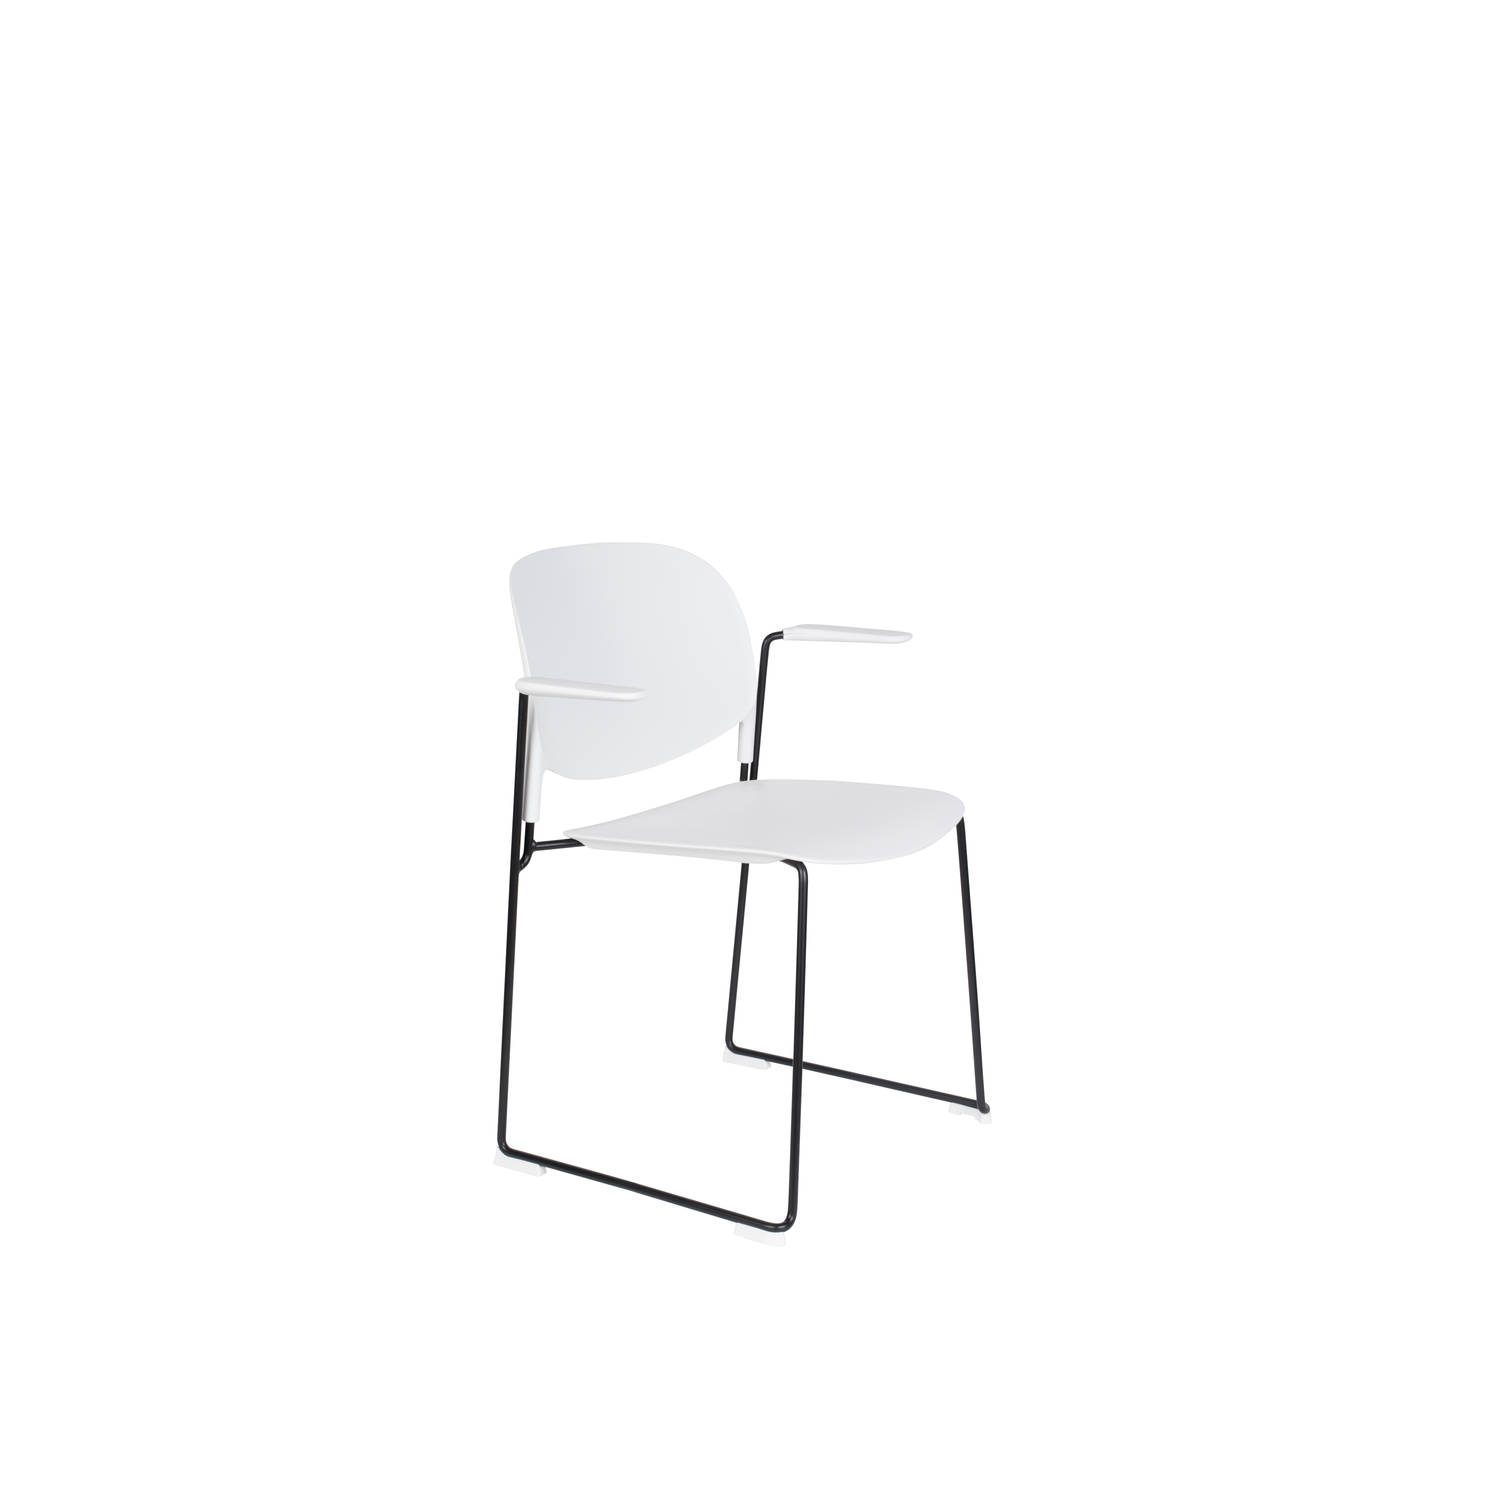 ANLI STYLE ARMCHAIR STACKS WHITE